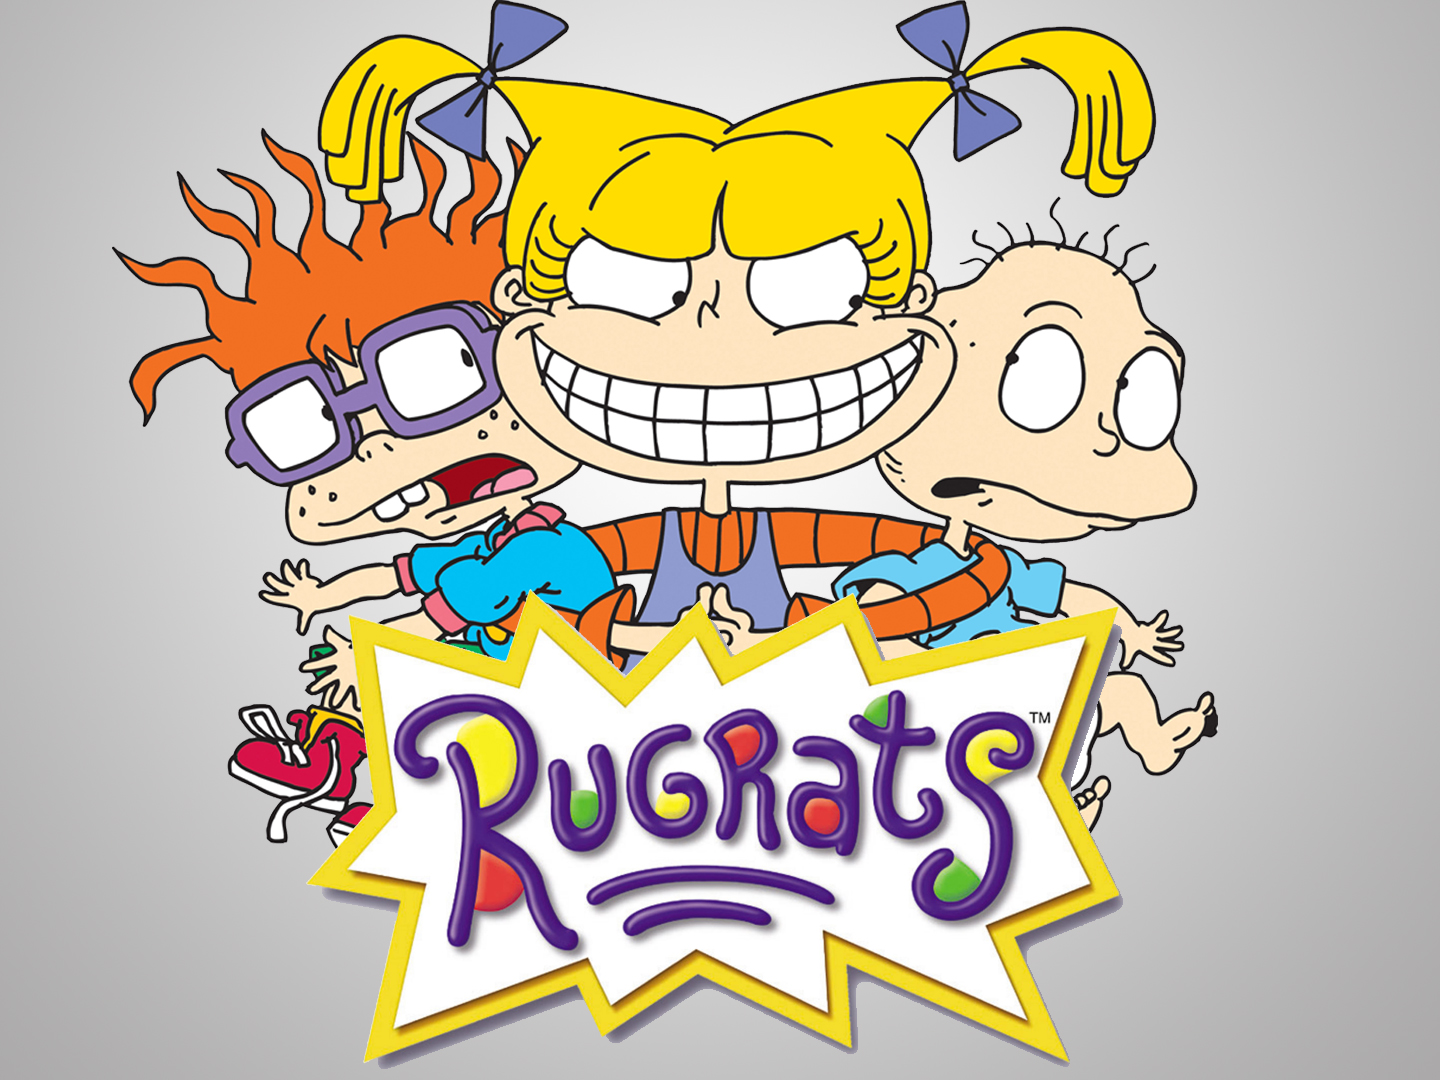 Rugrats Iphone Wallpaper Related Keywords & Suggestions - Ru